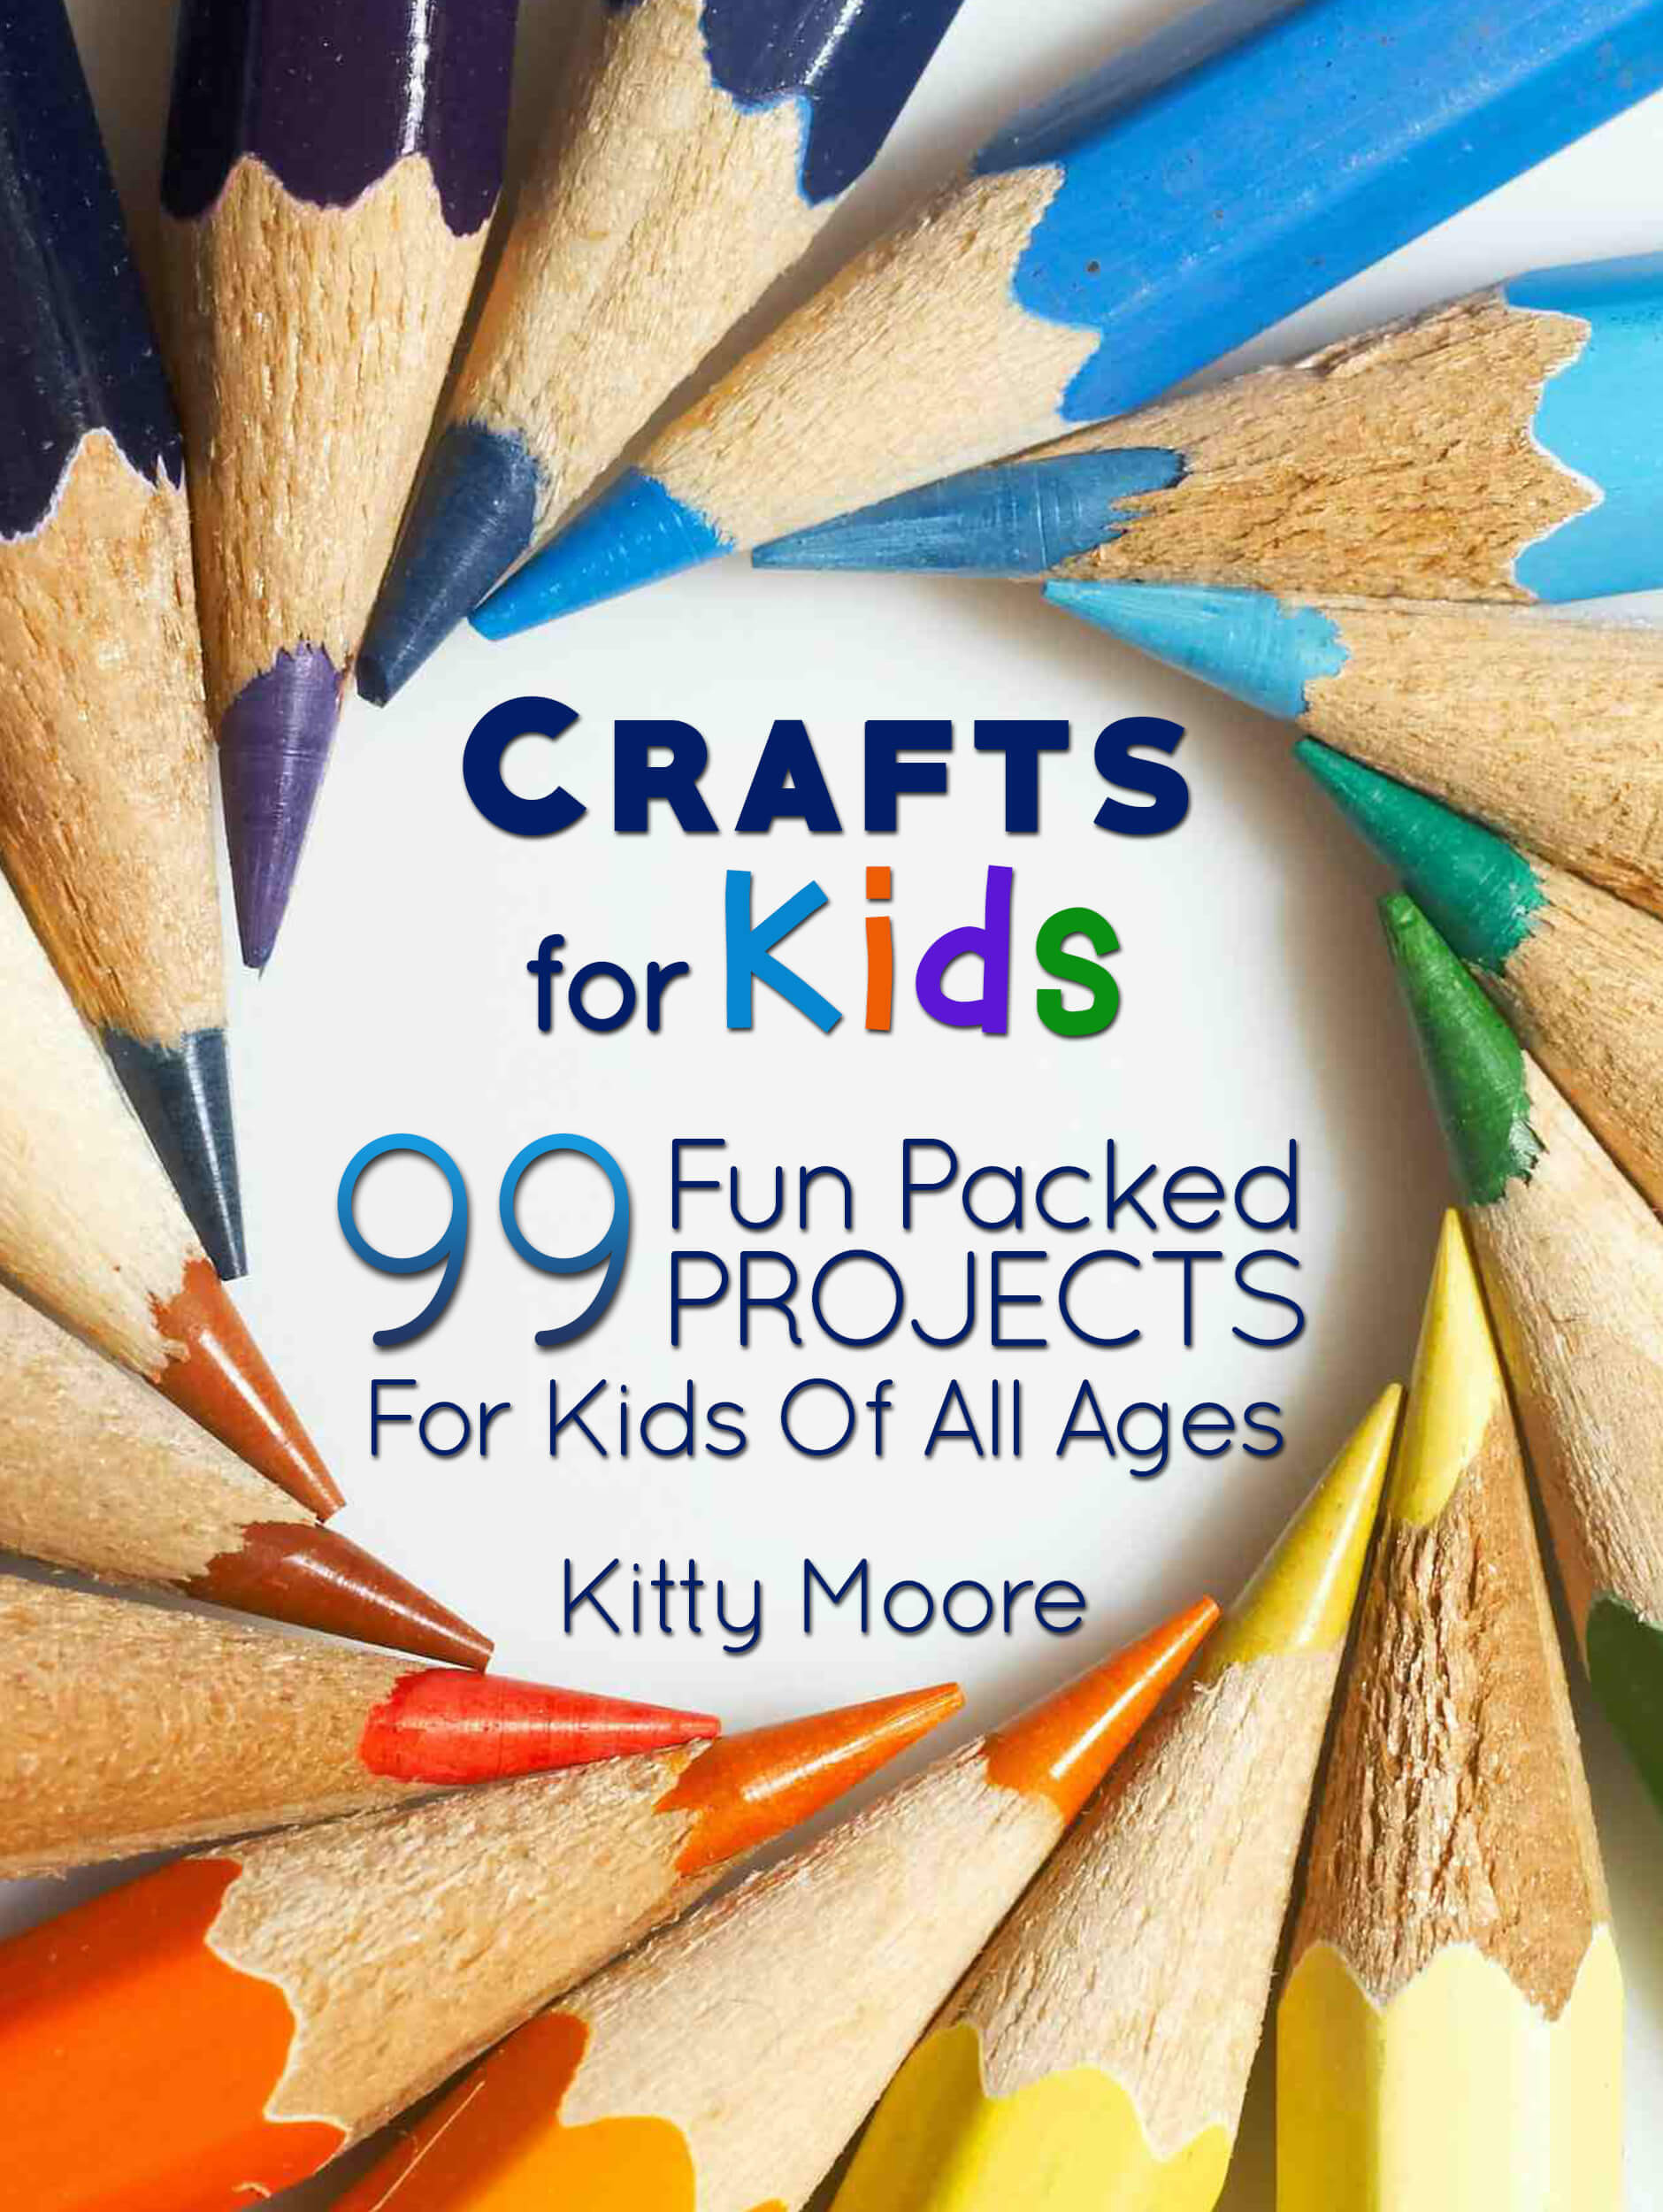 Toddlers Craft Projects
 FREE BOOK – Crafts for Kids 99 Fun Packed Projects For